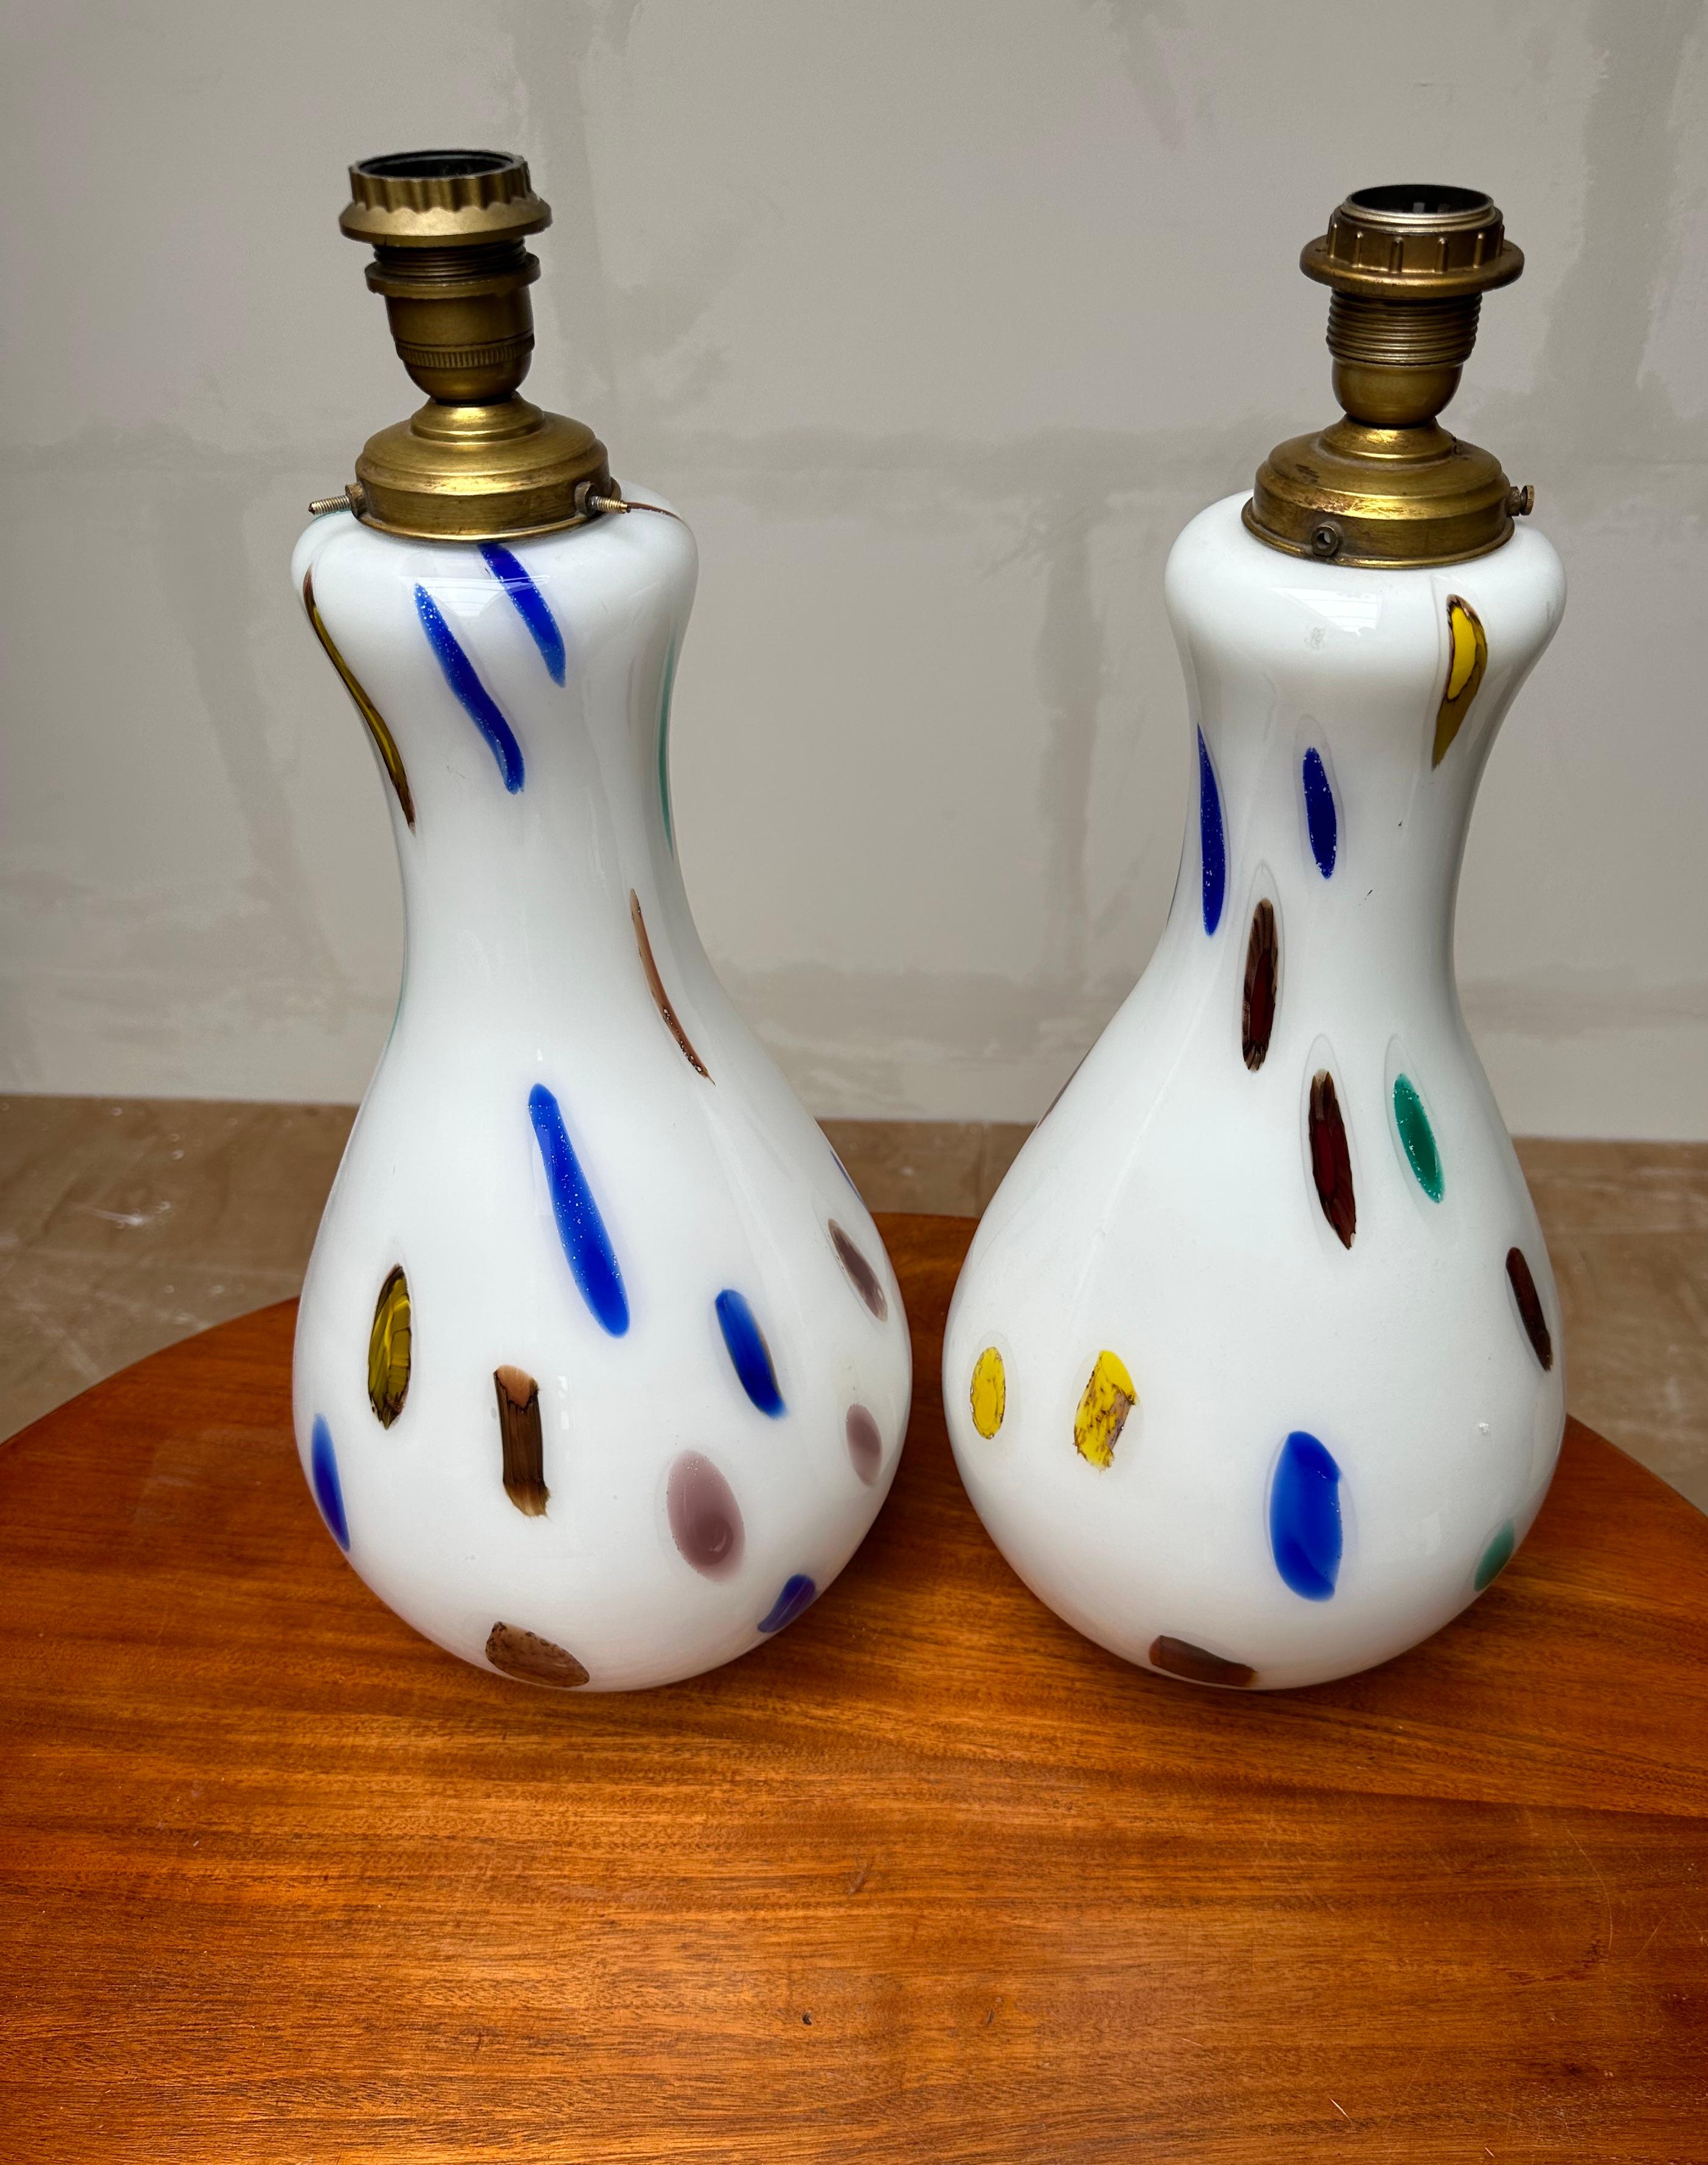 Impressive design, large size, mouth blown glass art table lights.

This unique and very impressive pair of handmade, glass art table lamps is another one of our recent great finds. With their large size and timeless design these Italian works of